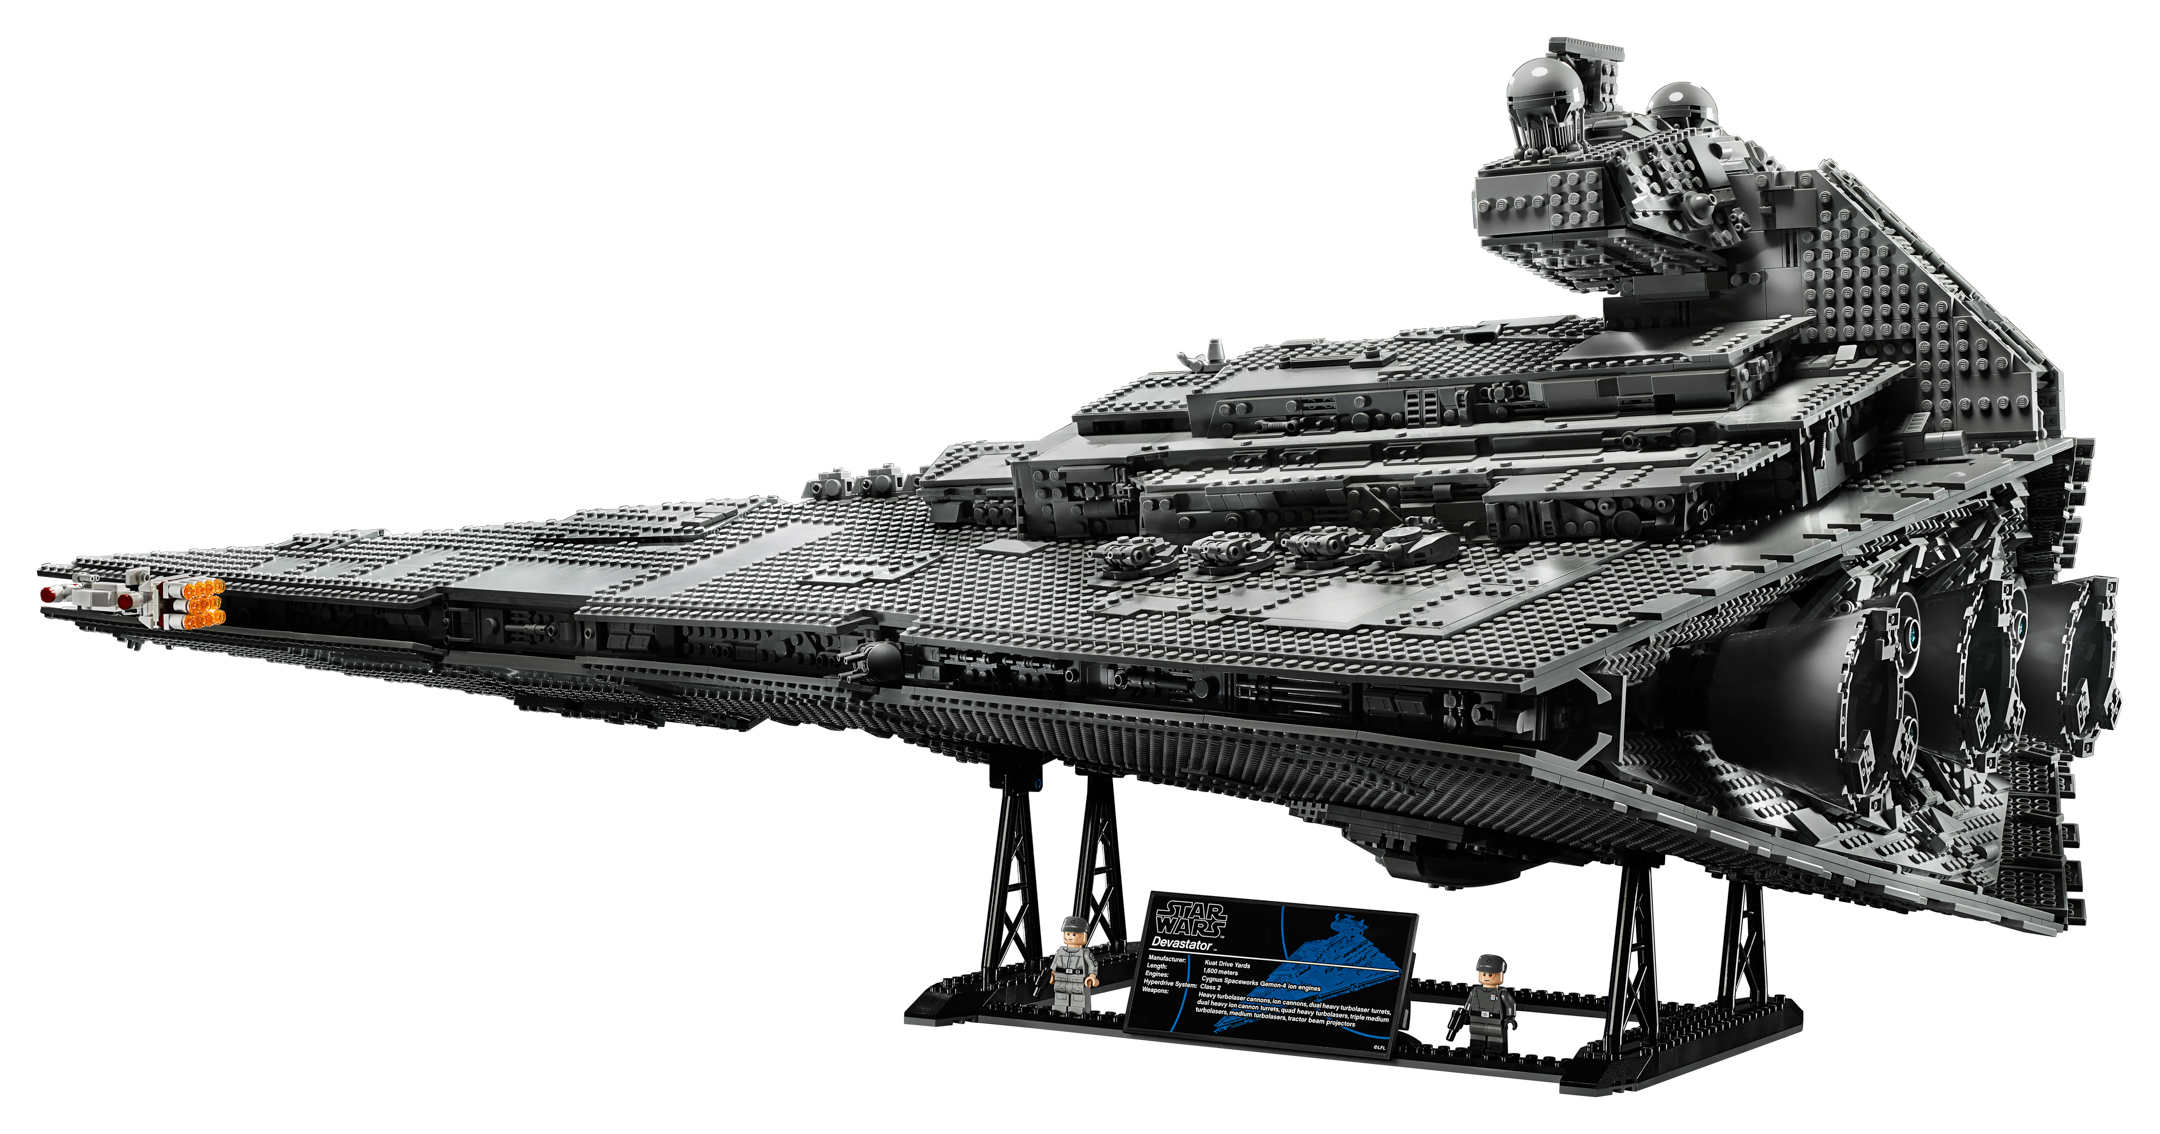 10 Most Expensive LEGO Sets Ever